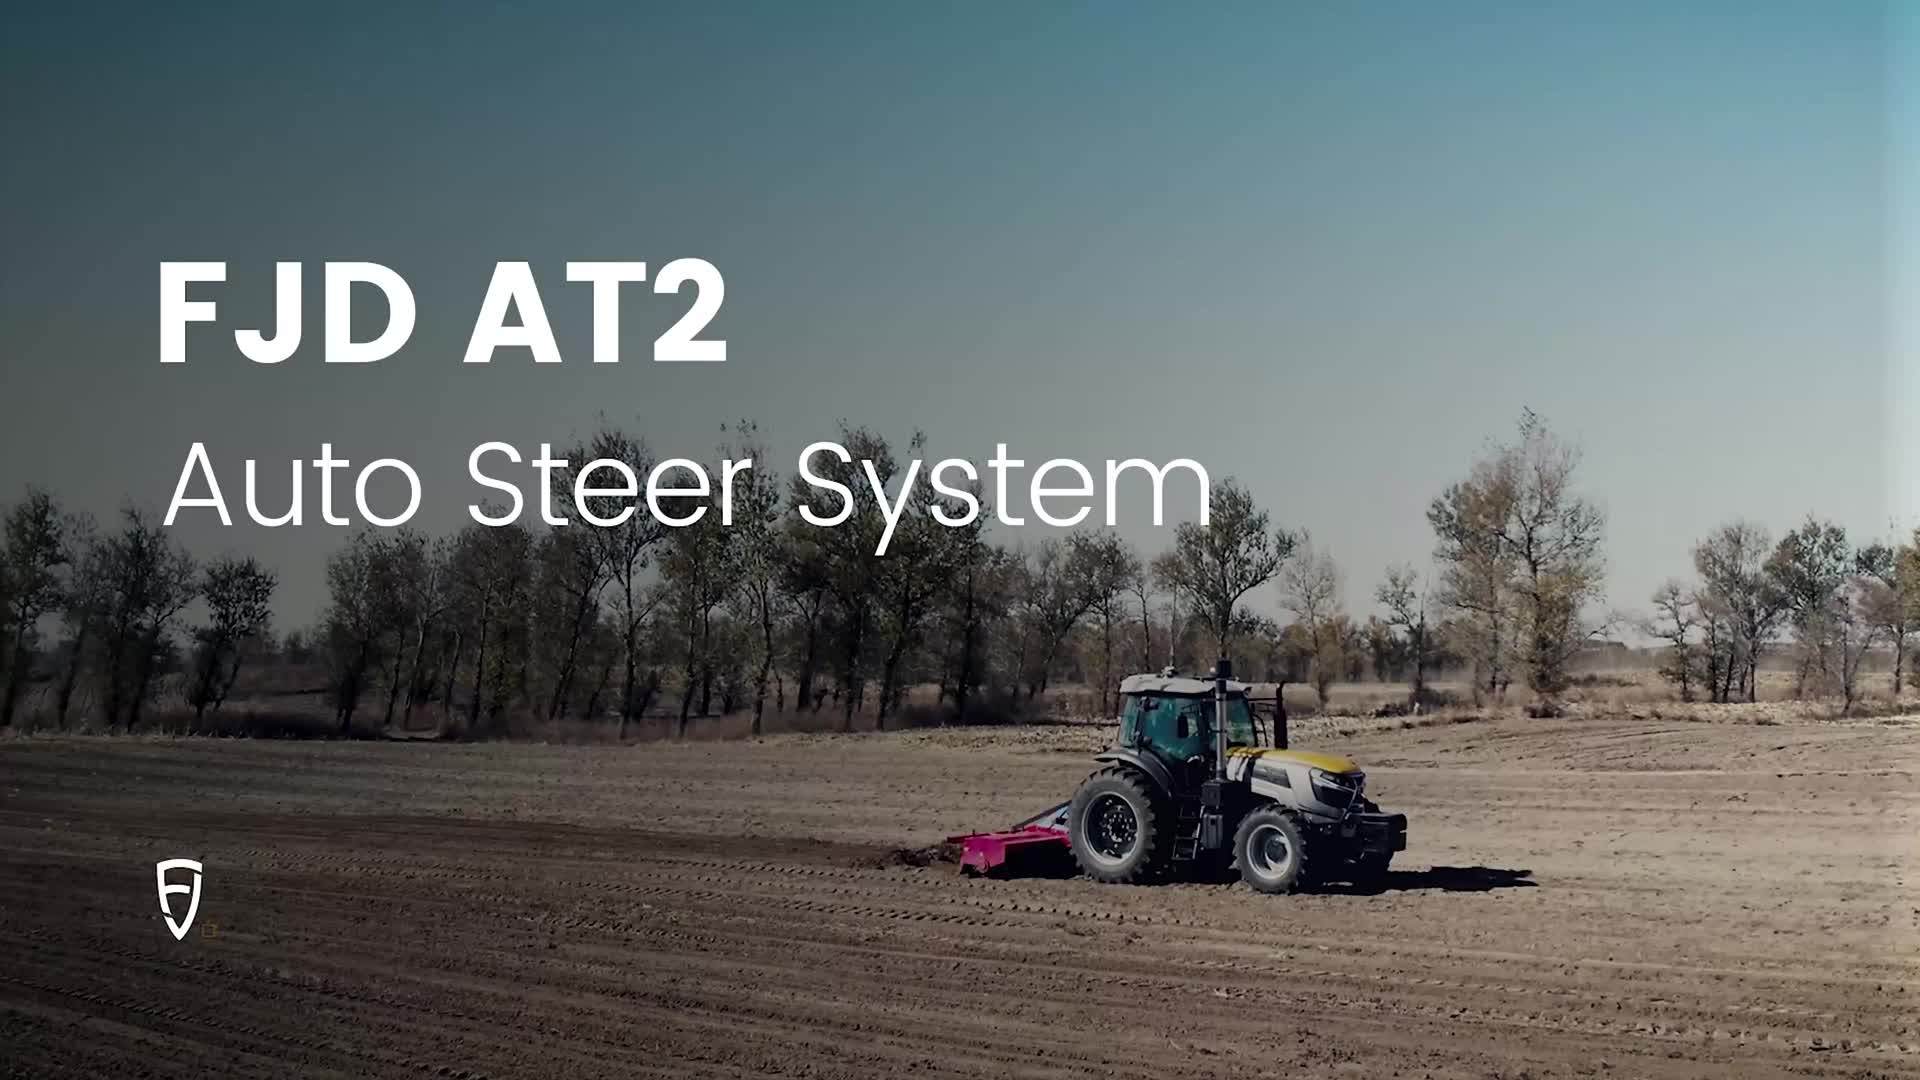 Load video: FJD AT1 Autosteering Kit uses GNSS and RTK to navigate tractors along straight lines, curves, or concentric circles with sub-inch (2.5 cm) accuracy.